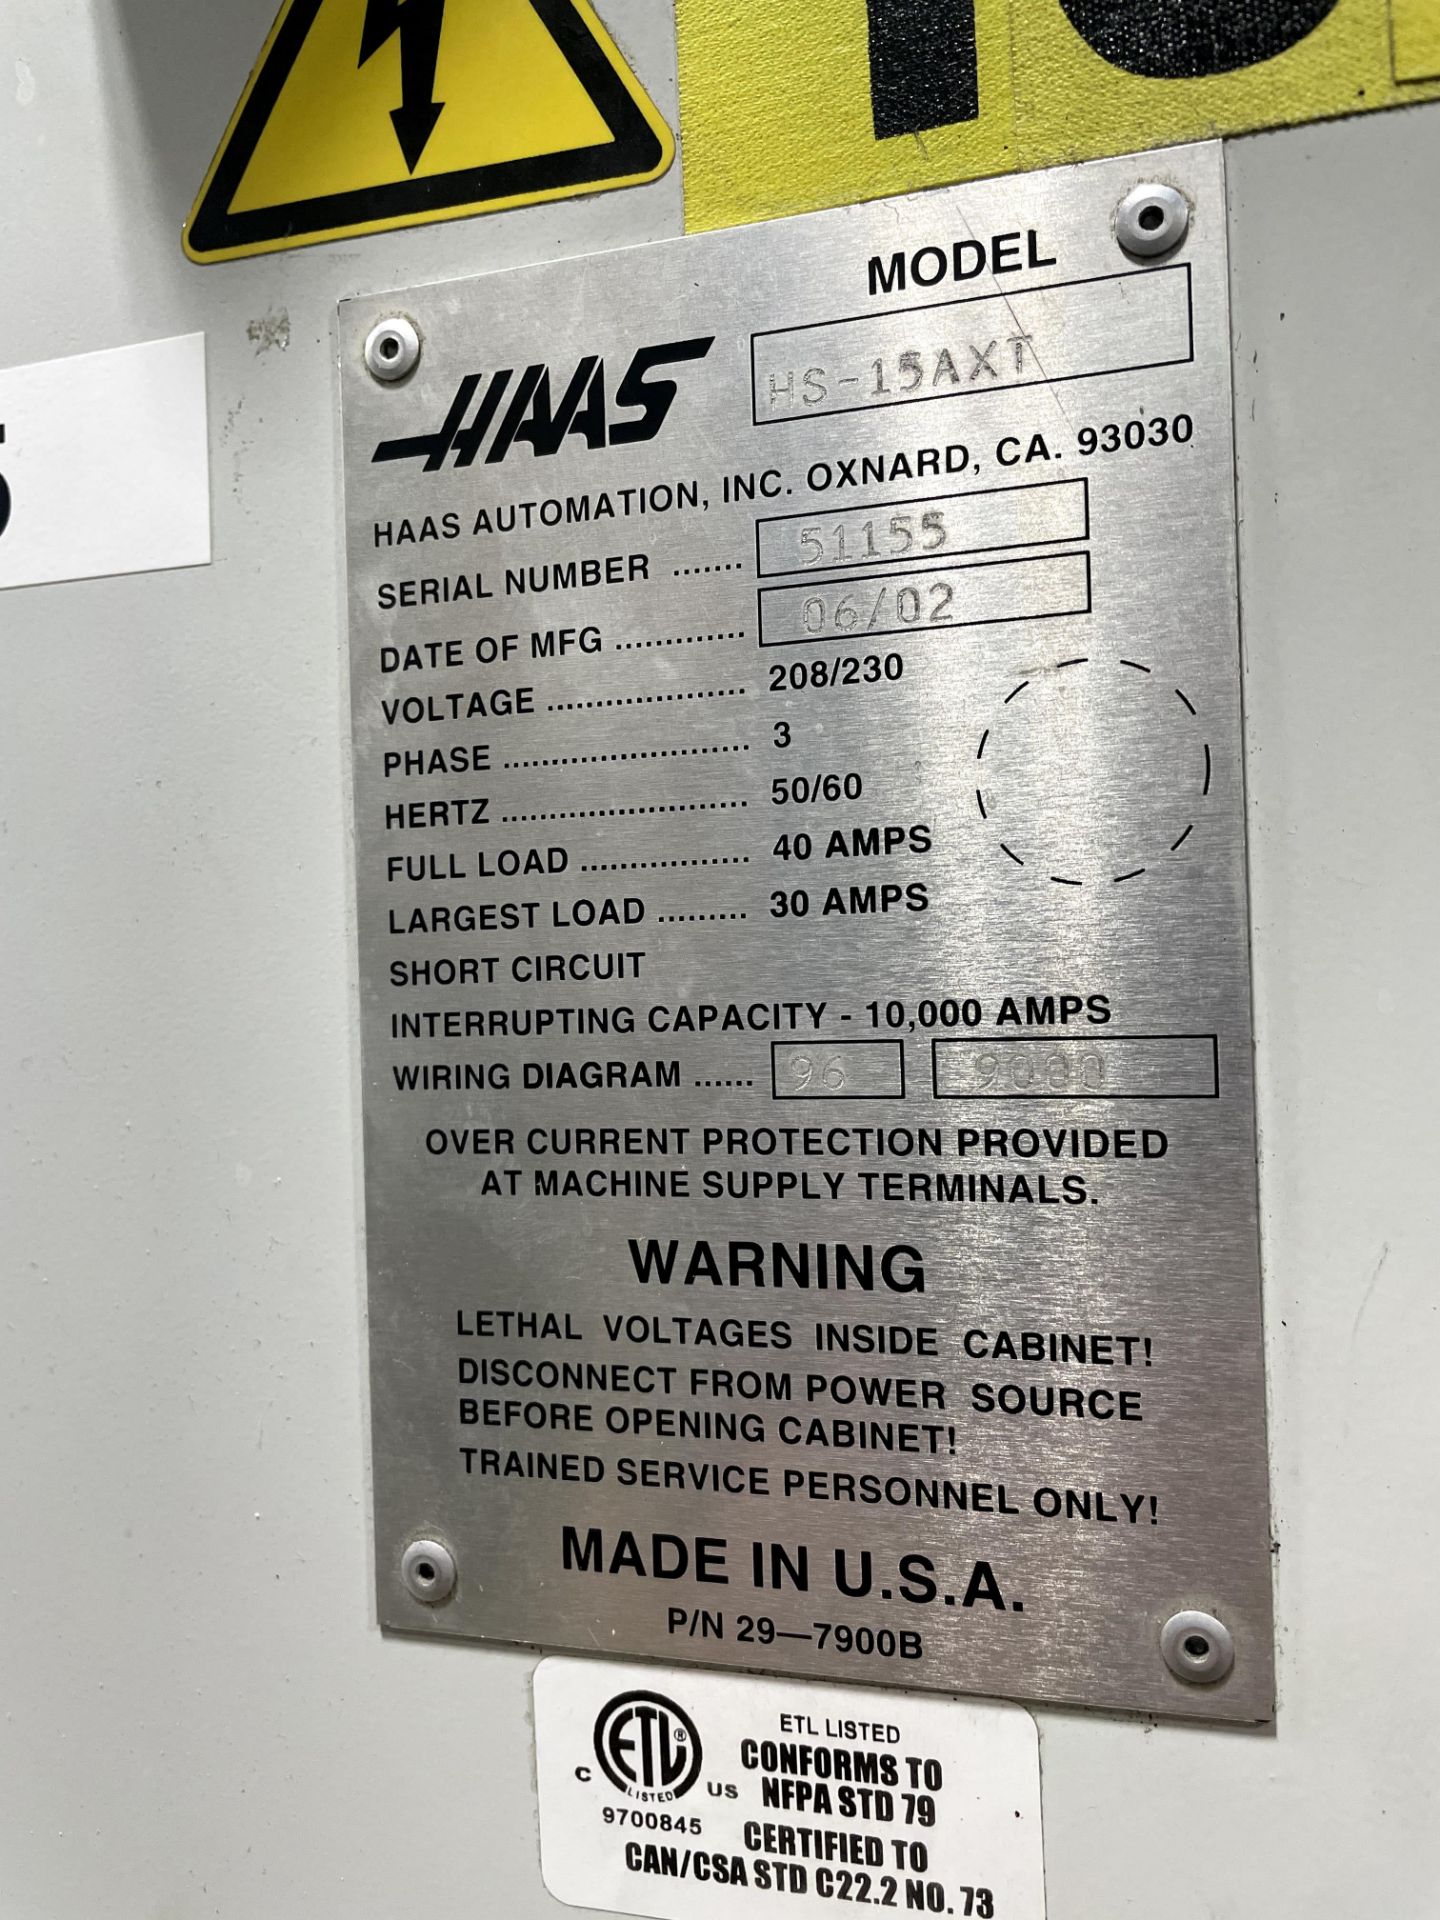 2002 Haas-15AXT Horizontal Machining Center w/4th Axis - Image 2 of 8